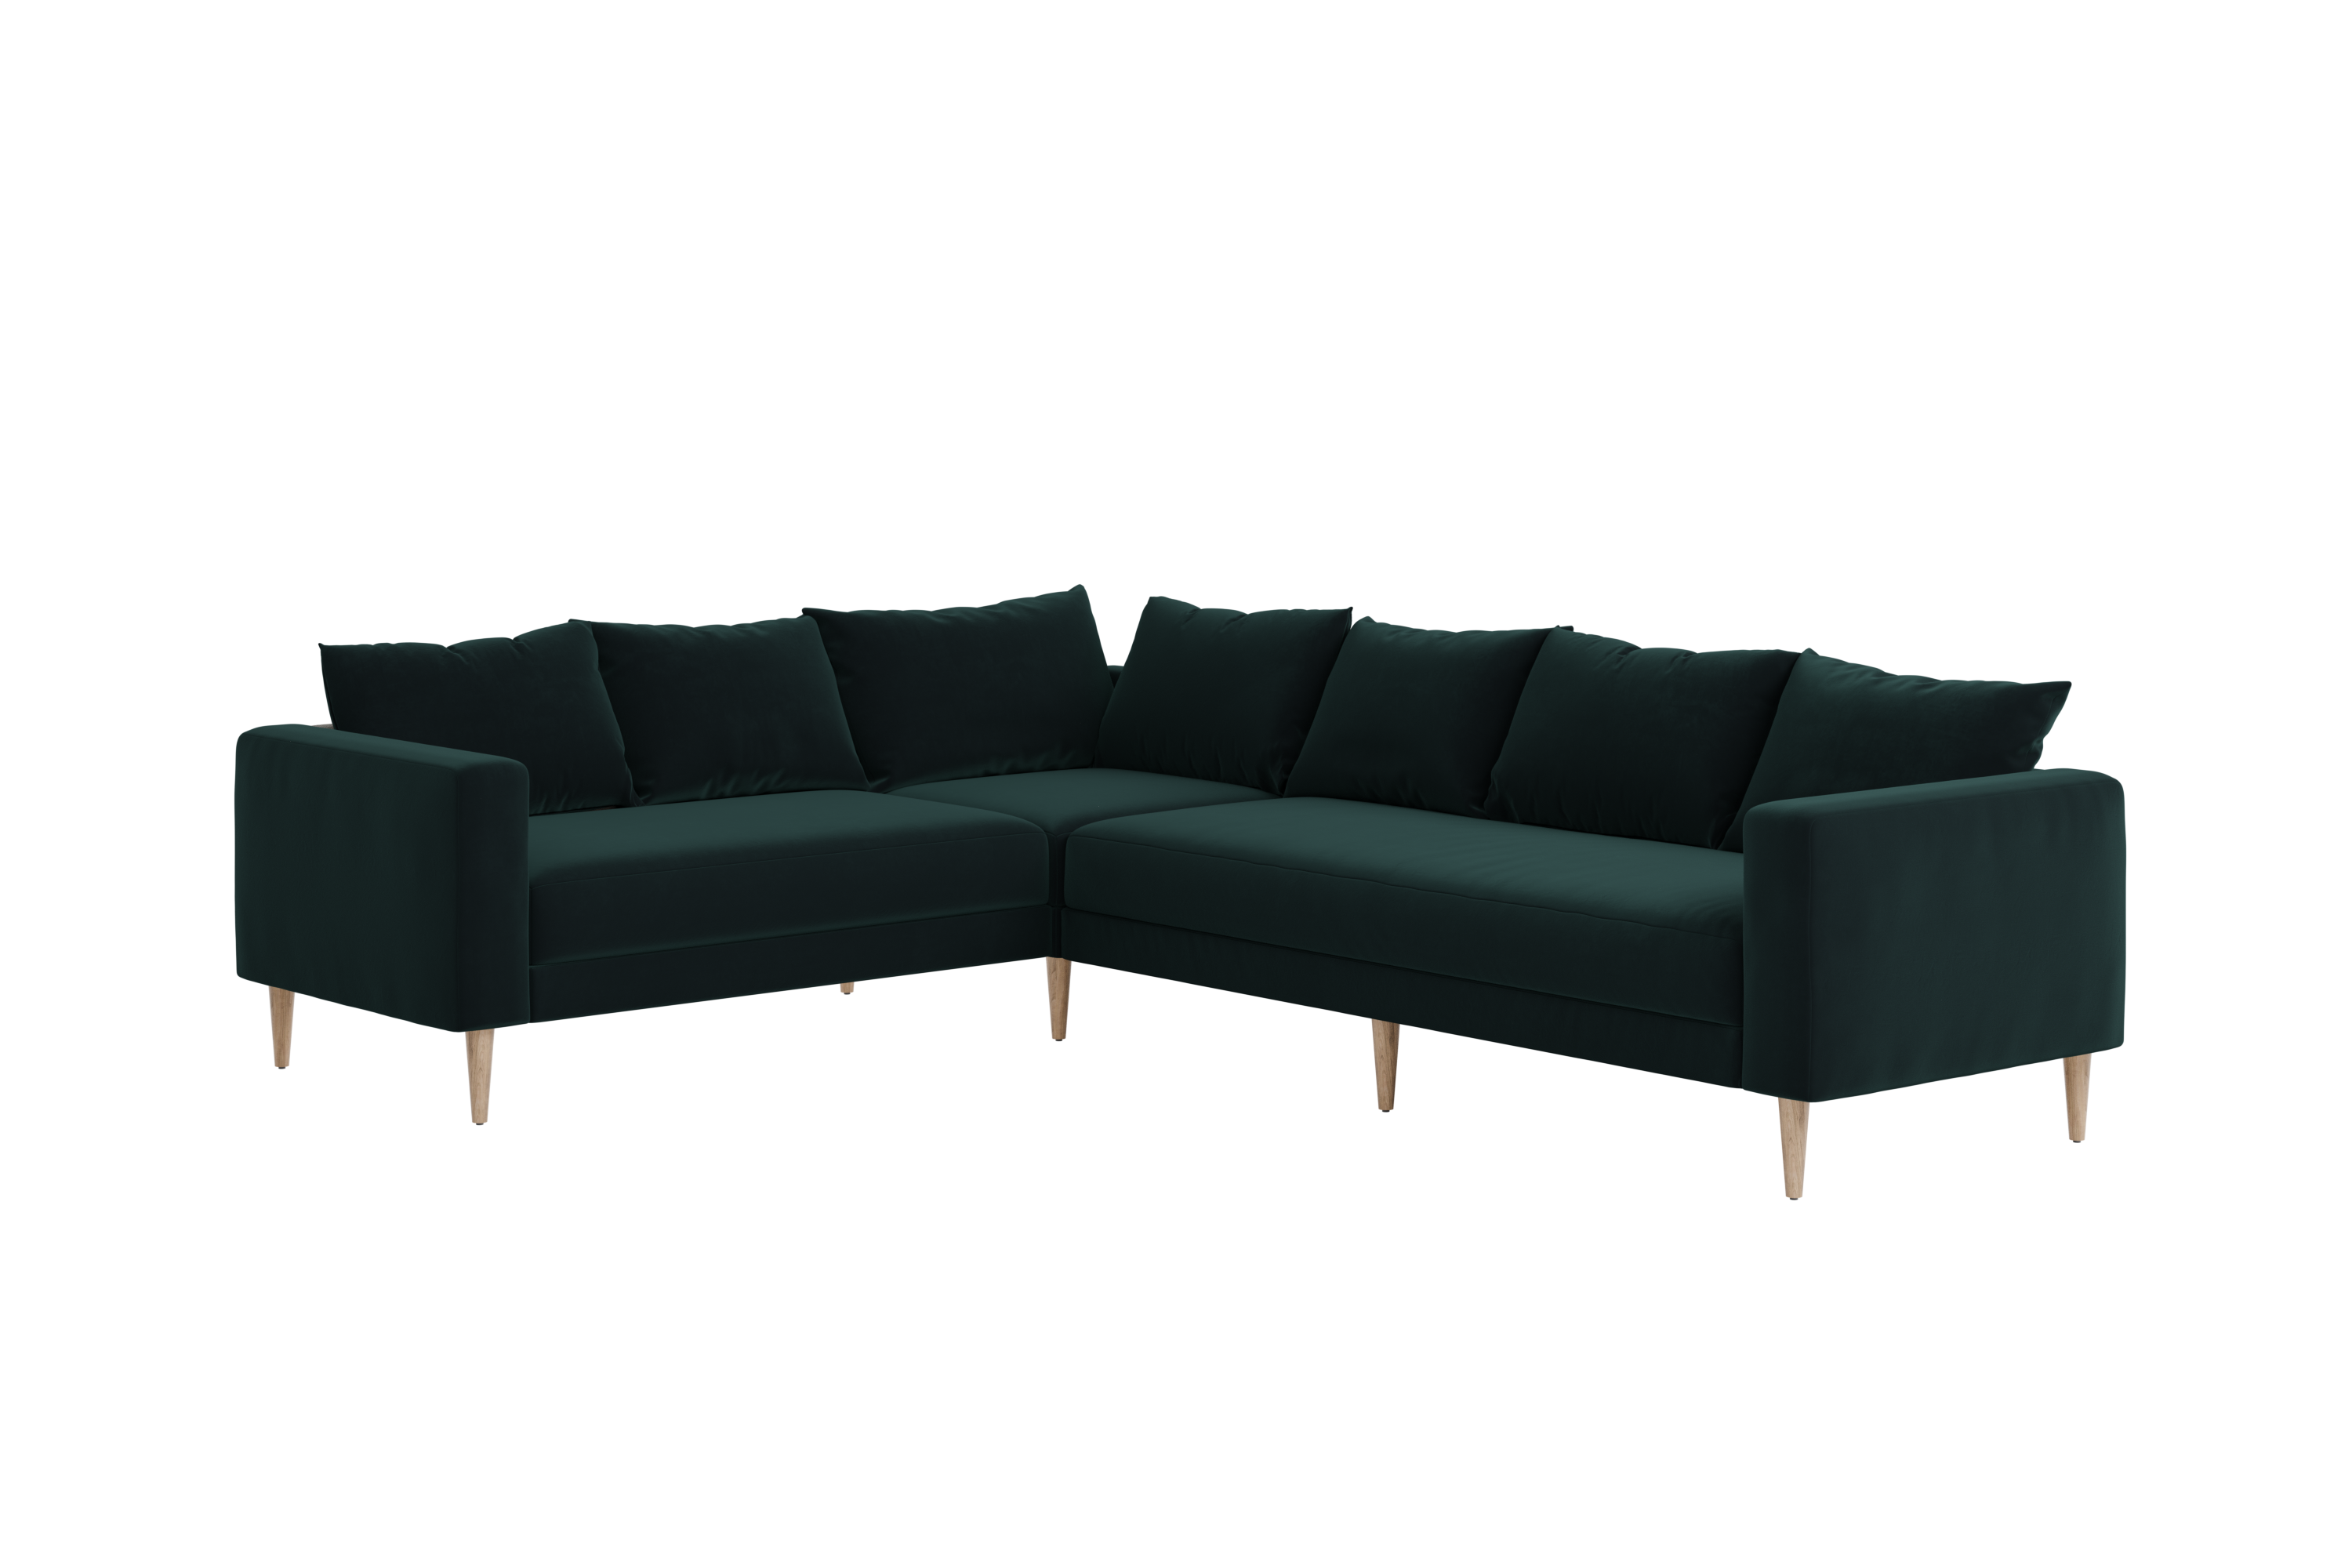 The Essential Corner Sectional (6 Seat) in Upcycled Poly